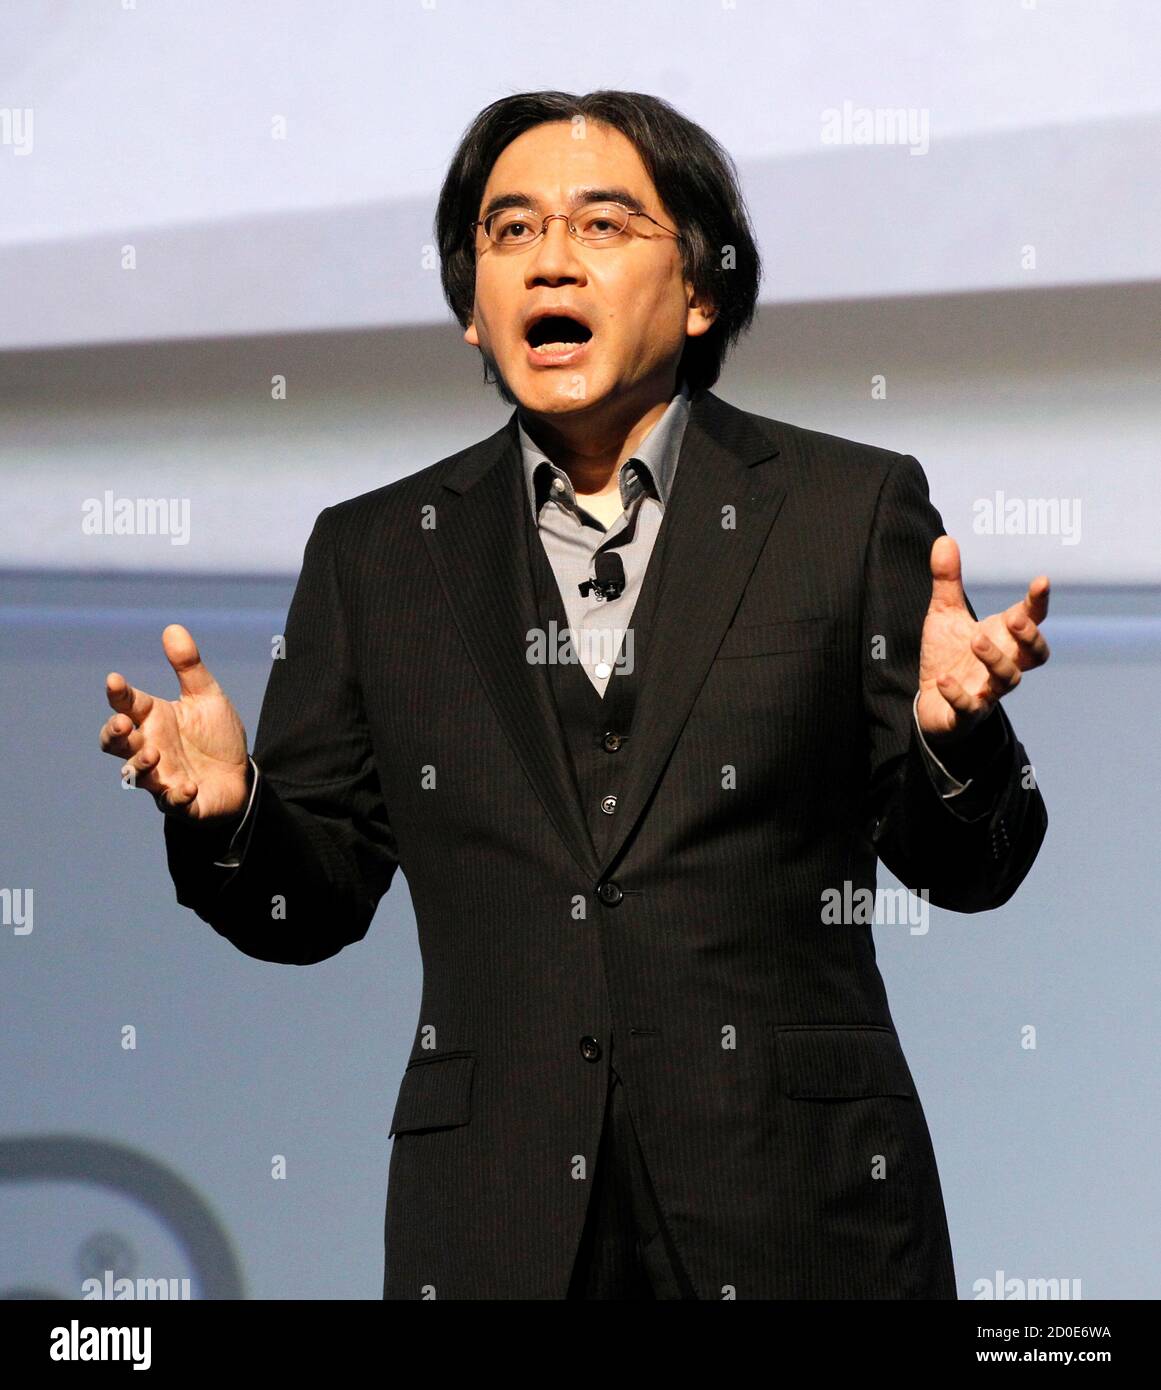 Satoru Iwata, President of Nintendo Co., Ltd., speaks at a media briefing  during the Electronic Entertainment Expo, or E3, in Los Angeles June 7,  2011. REUTERS/Mario Anzuoni (UNITED STATES - Tags: ENTERTAINMENT